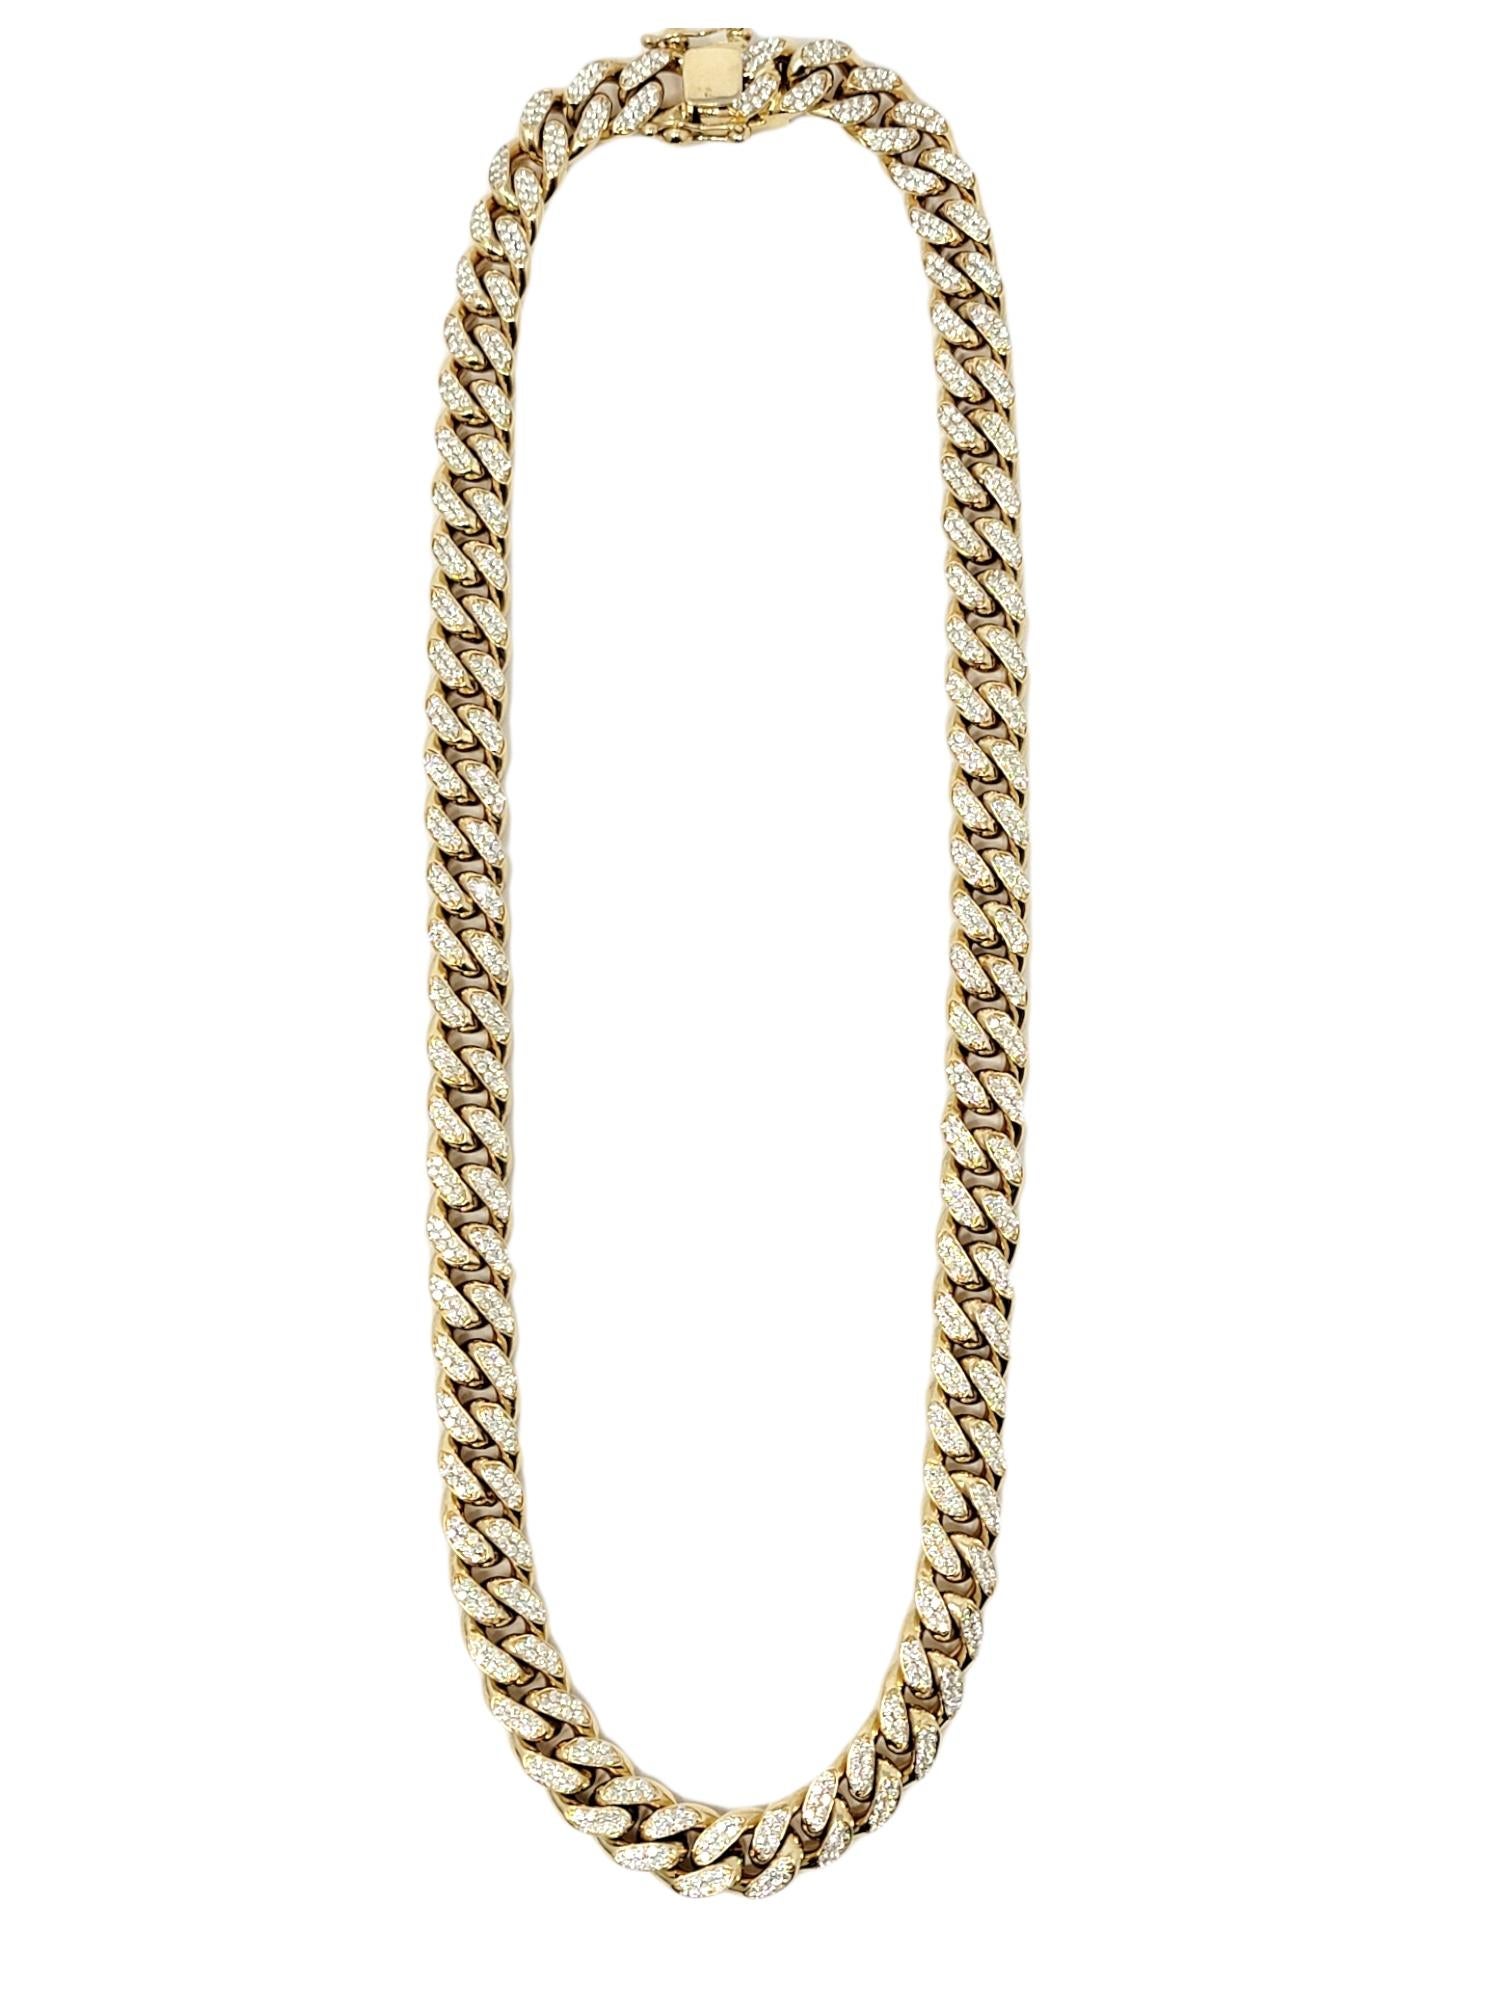 Bold, heavy diamond link necklace in a stunning unisex design. Typically thought of as a men's bold necklace, increasingly women are wearing this style too as a strong fashion piece. This eye-catching necklace features a polished 10 karat yellow